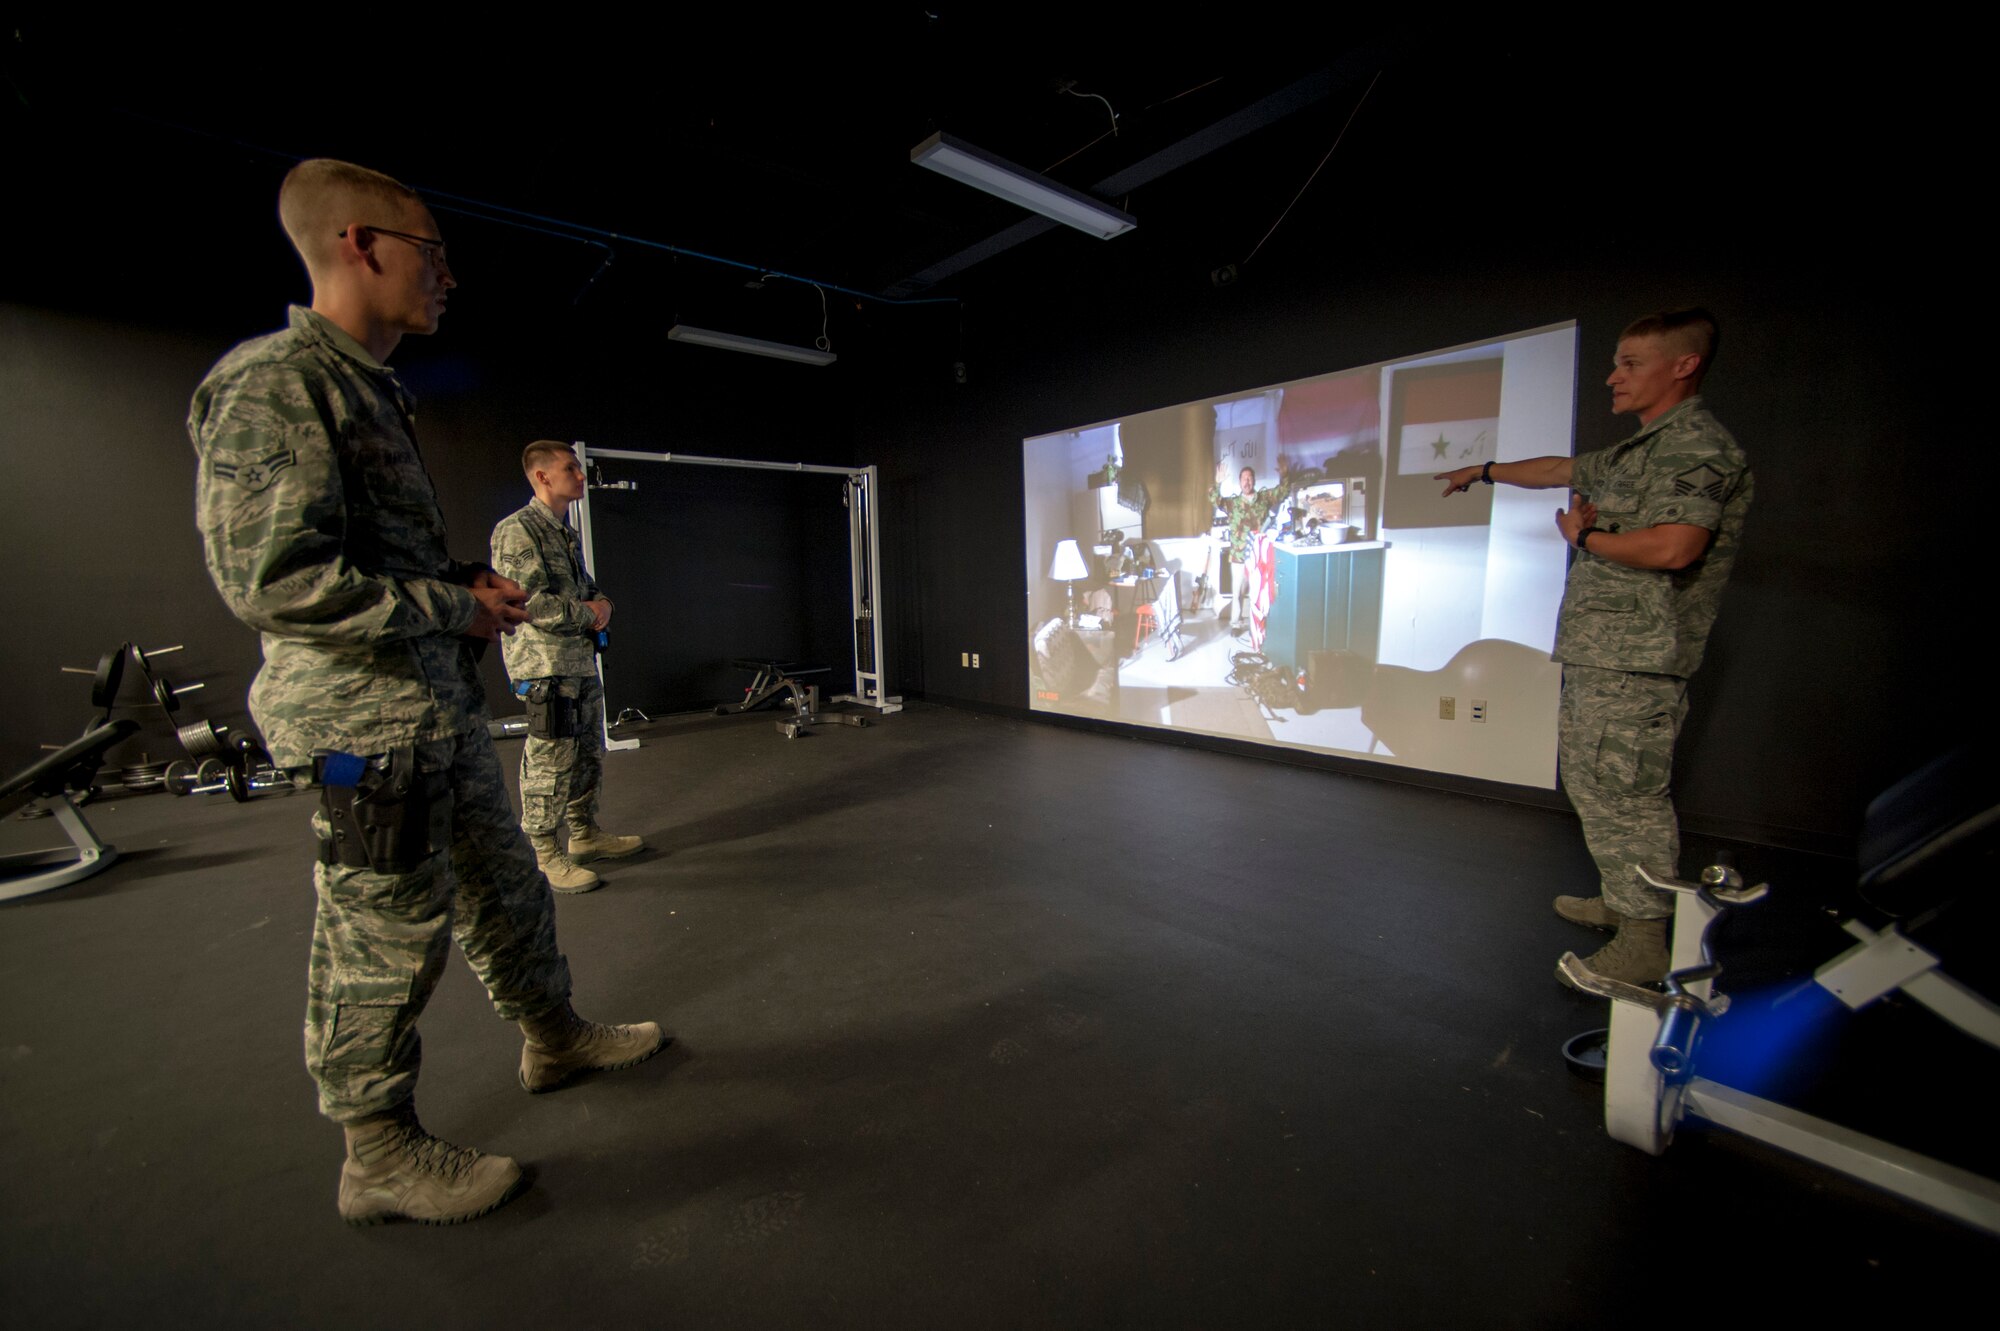 U.S. Air Force Airman 1st Class Jacob Watson and Senior Airman Nicholas Puleo, 140th Security Forces Squadron, Colorado Air National Guard, receive instructions from Master Sgt. Joshua Thornton, during Use of Force training at Buckley Air Force Base, Aurora Colo., Oct. 15, 2015. This training is a part of the 140th Wing’s 4-day, Wing Wartime Readiness Inspection, the U.S. Air Force’s new evaluation system for wartime, contingency and force sustainment readiness.  (U.S. Air National Guard photo by Tech. Sgt. Wolfram M. Stumpf)